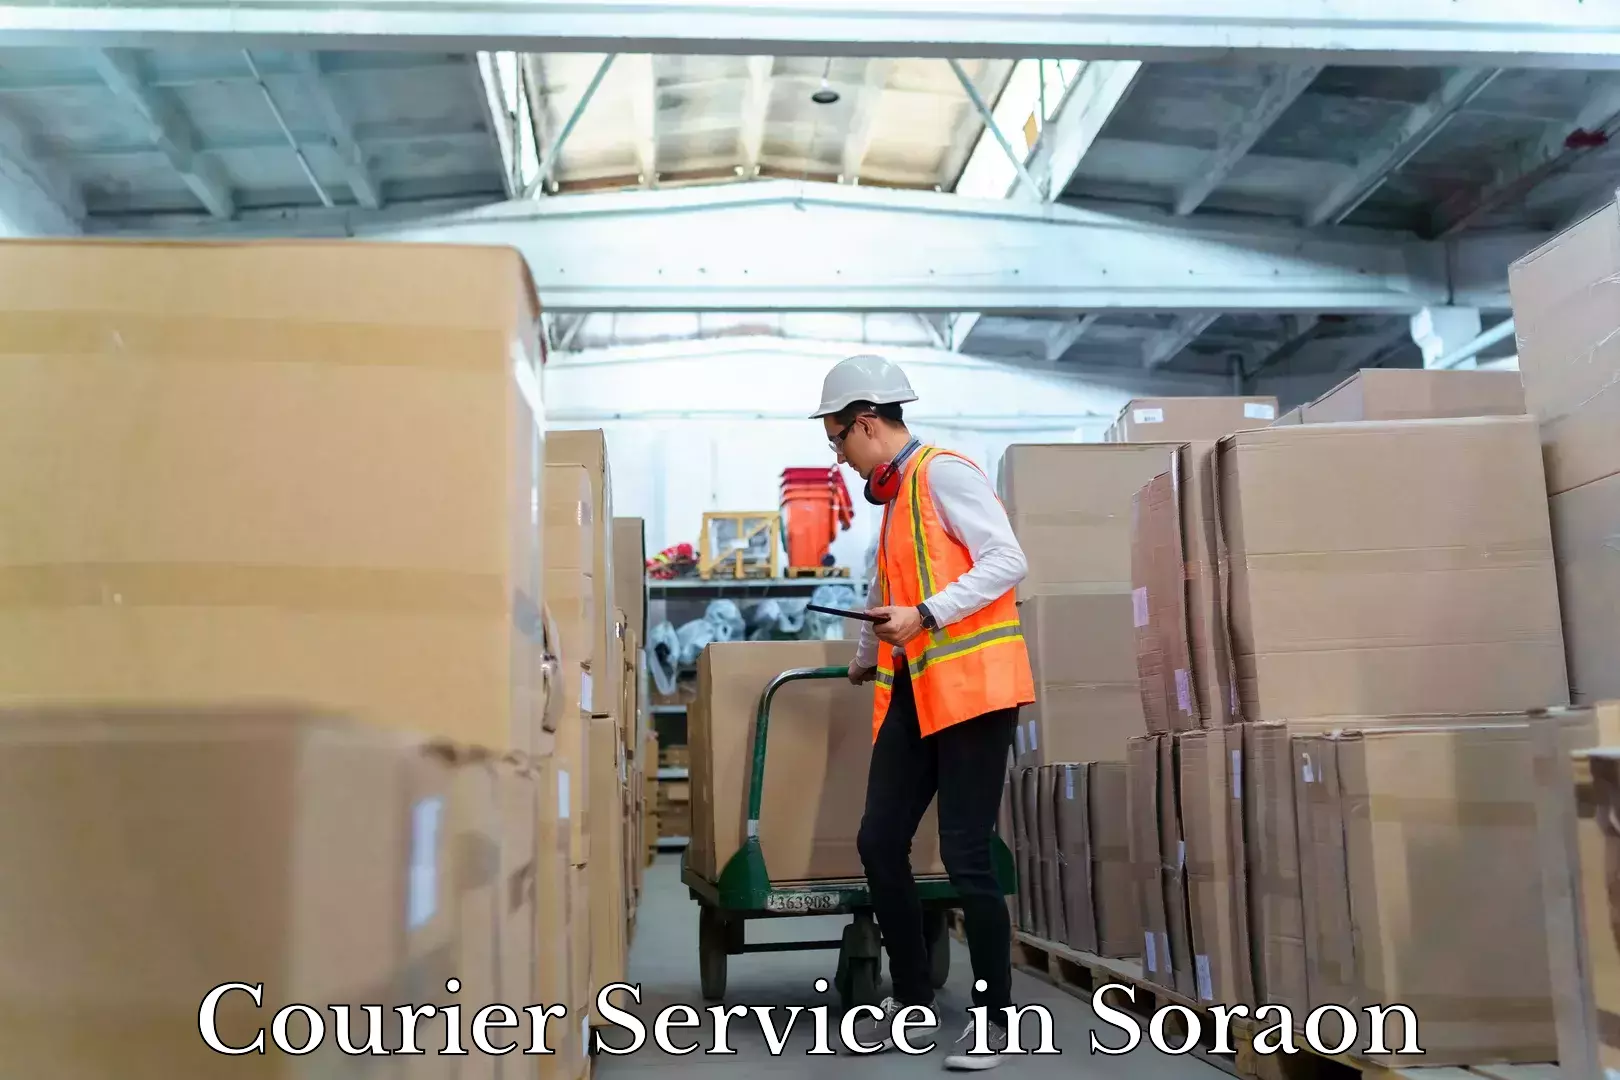 Courier service partnerships in Soraon